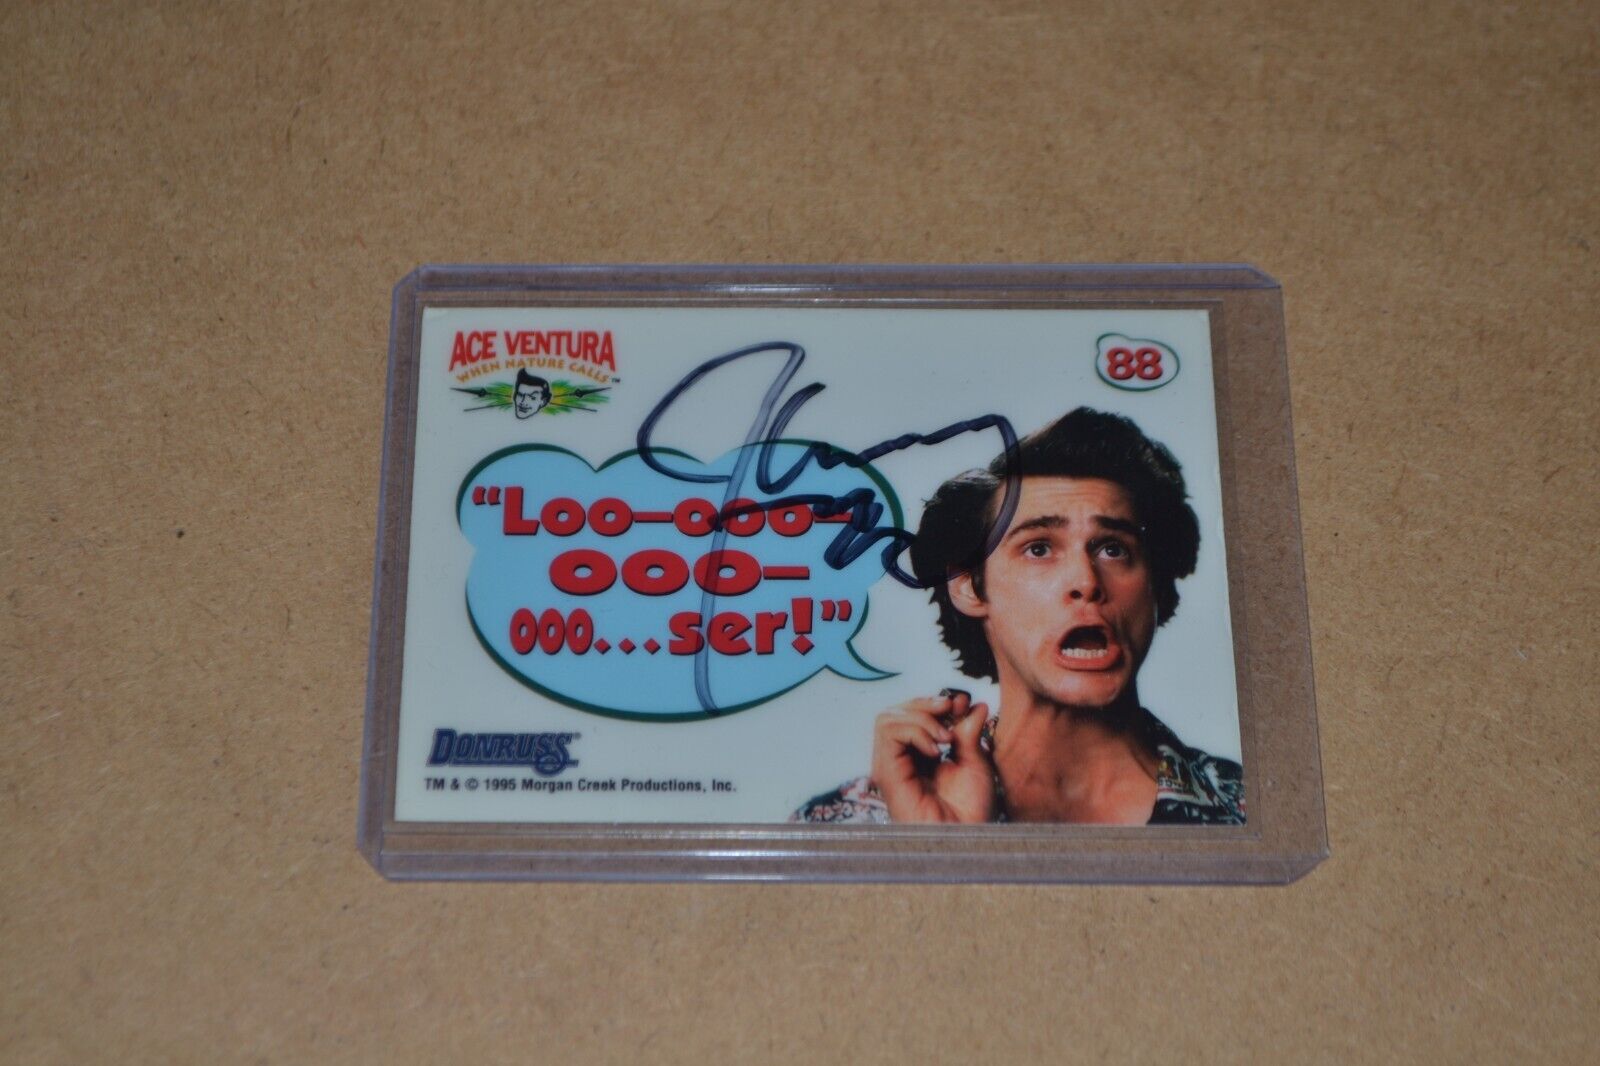 JIM CARREY Hand Signed ACE VENTURA CLING CARD #88 Autographed